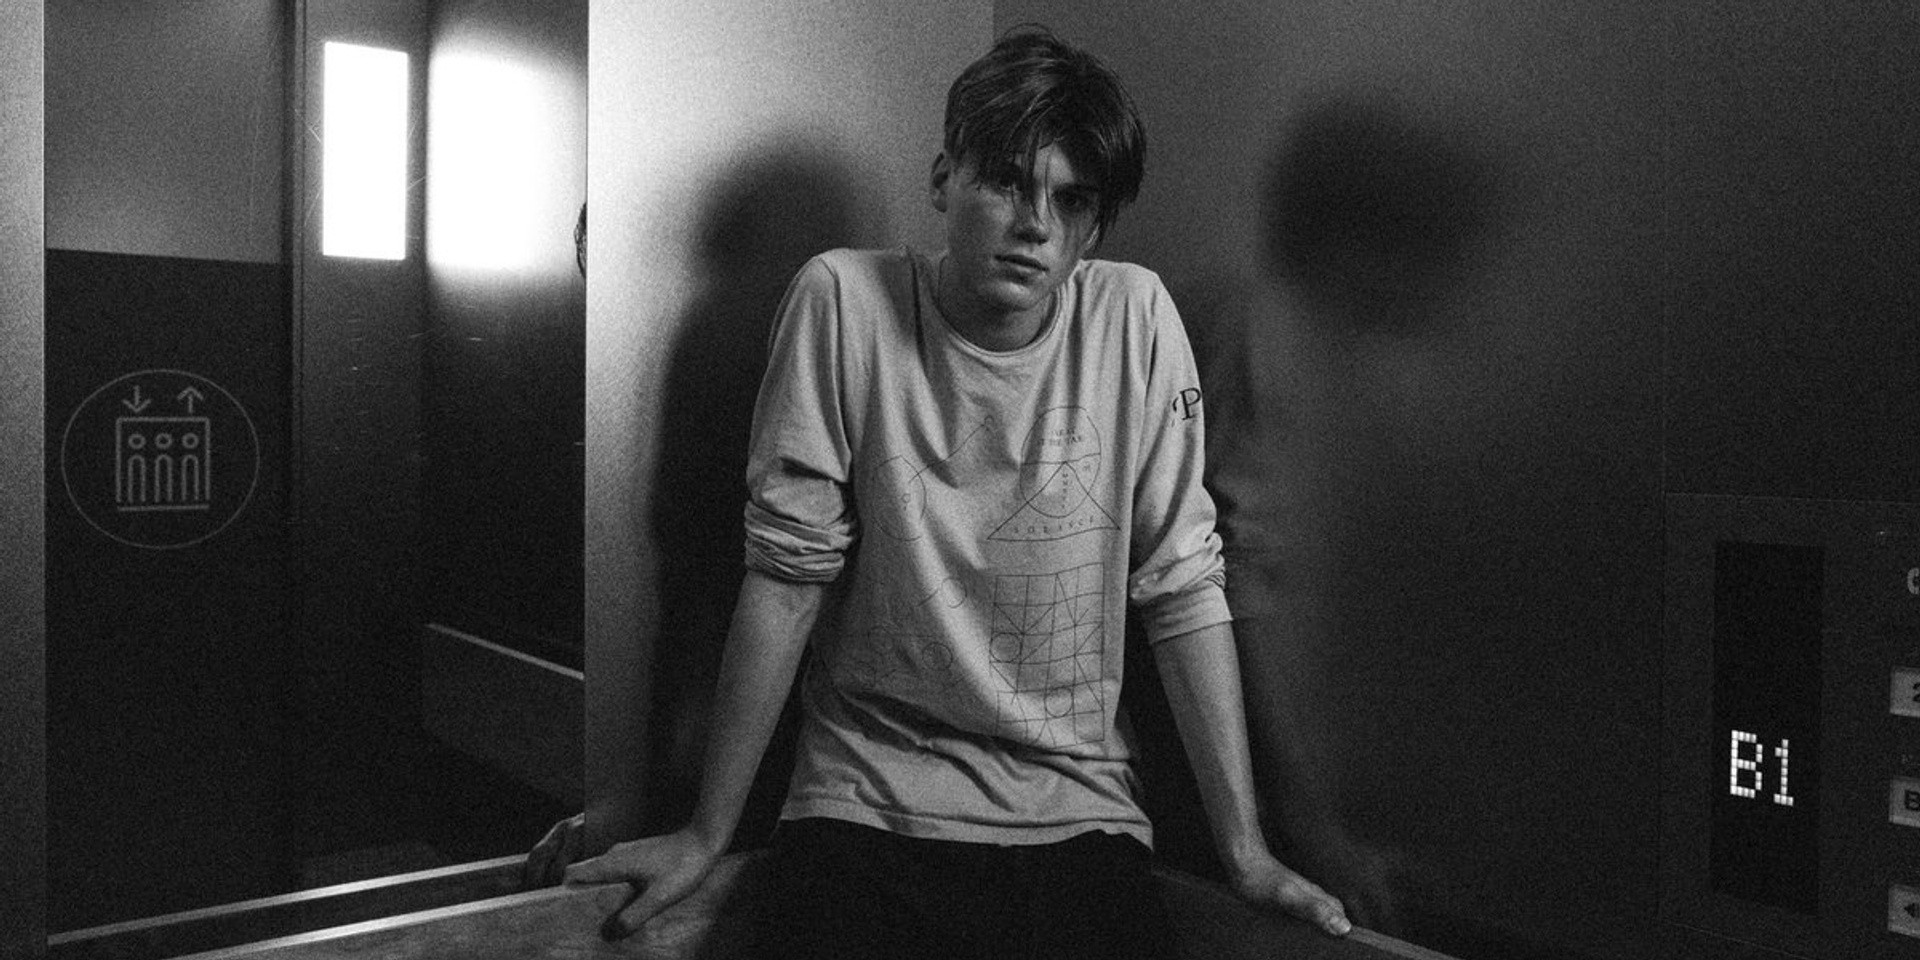 Ruel to perform in Singapore this March 